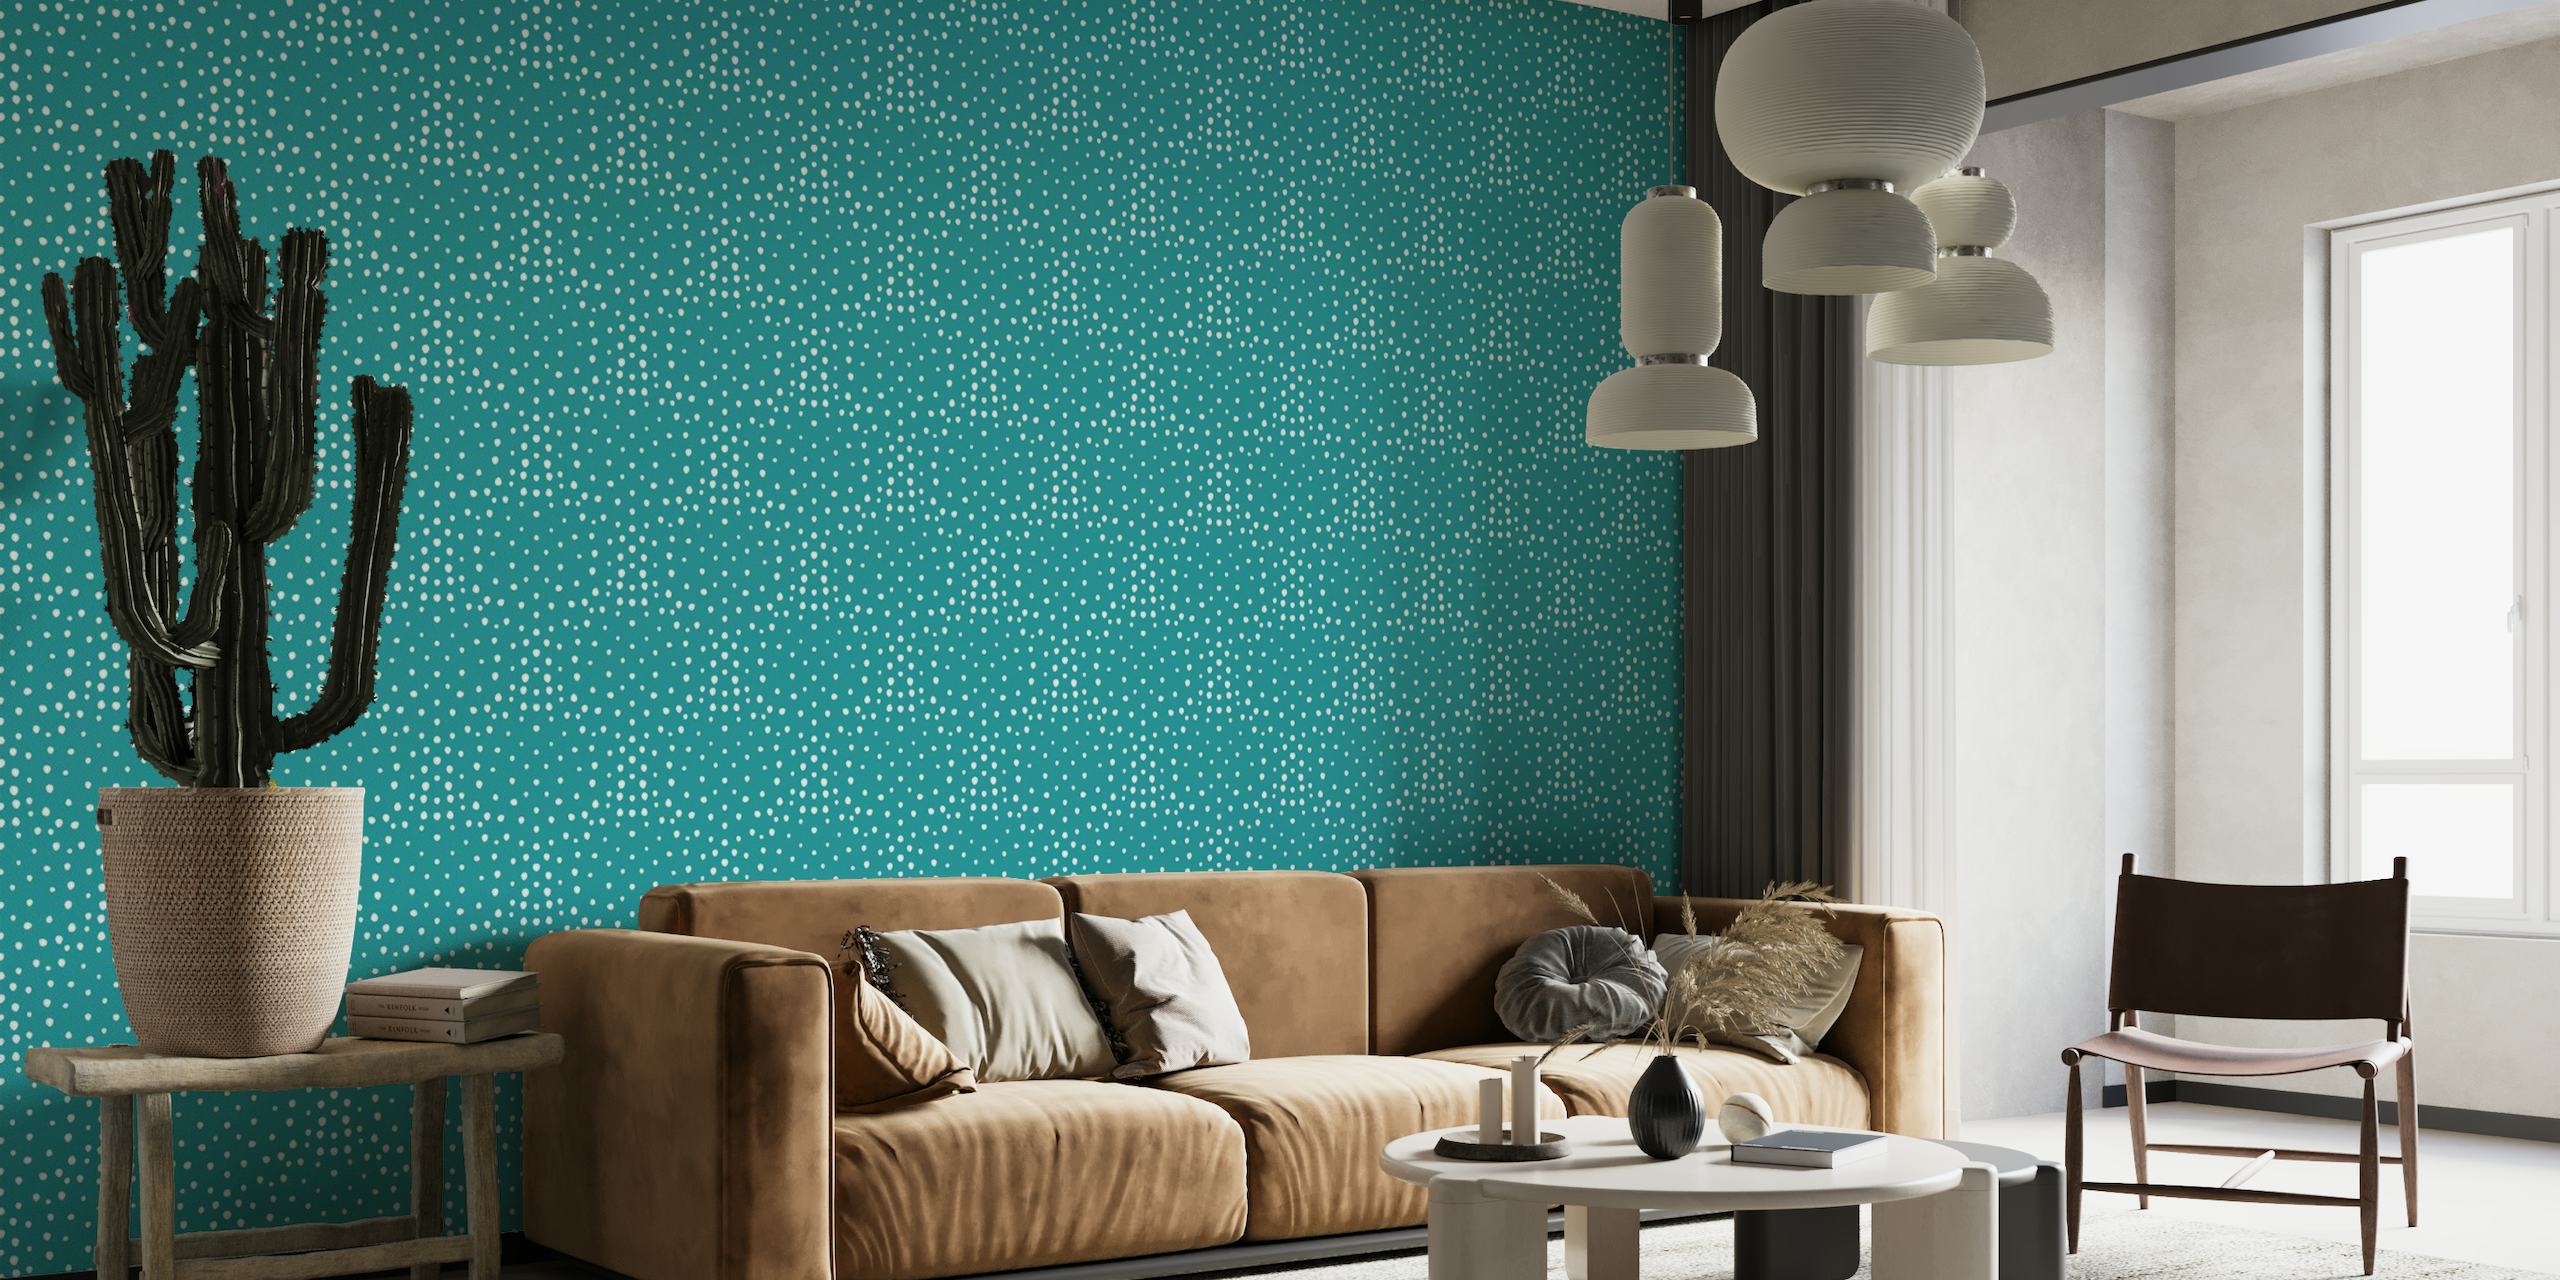 Turquoise Tranquility: Abstract Dots Blender Design - GD23-A17 tapet